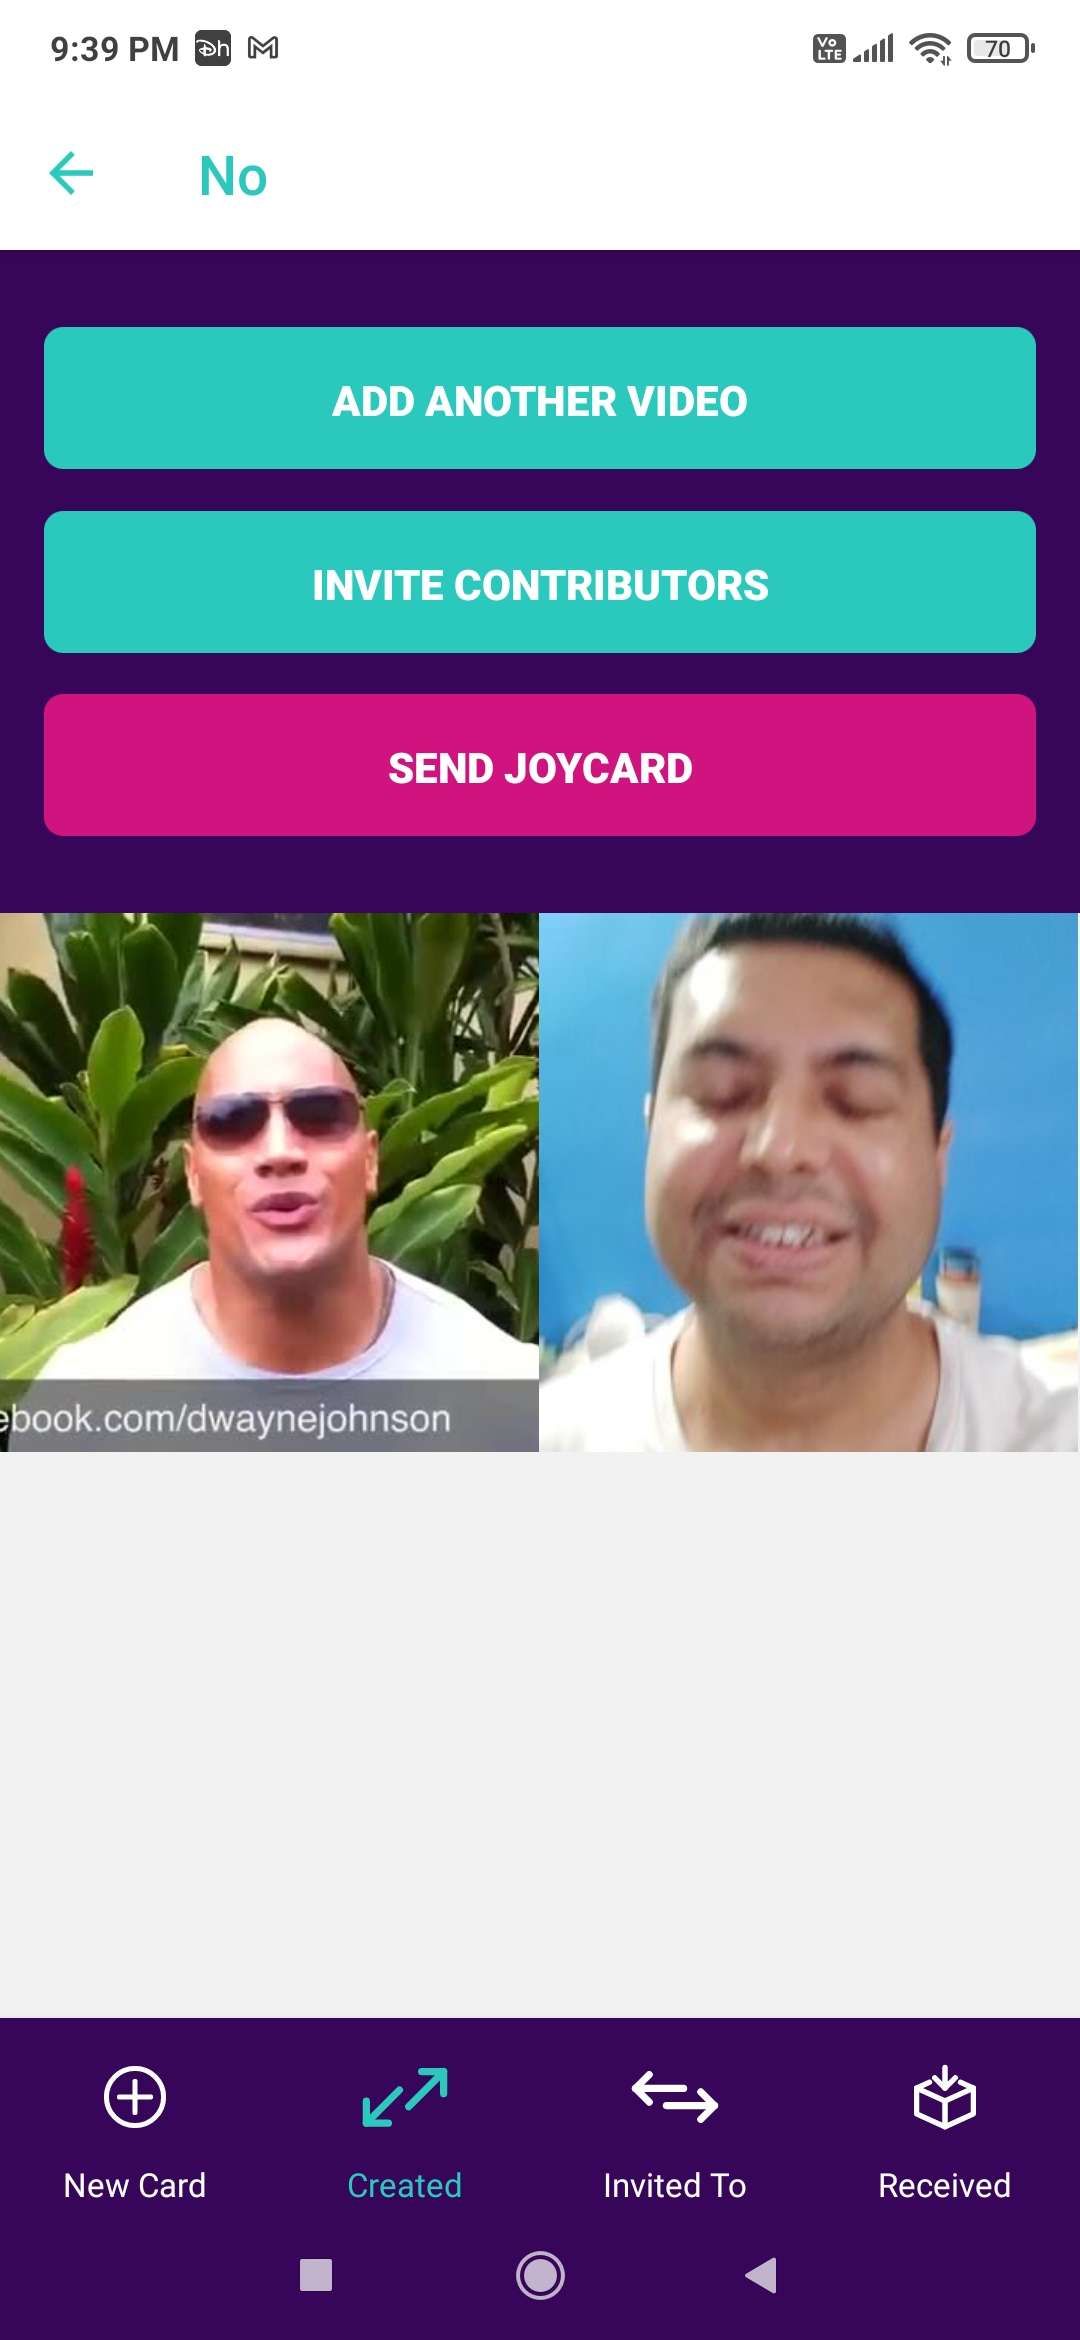 Joycards are saved in the app for sender and recipient, and can be downloaded by the recipient